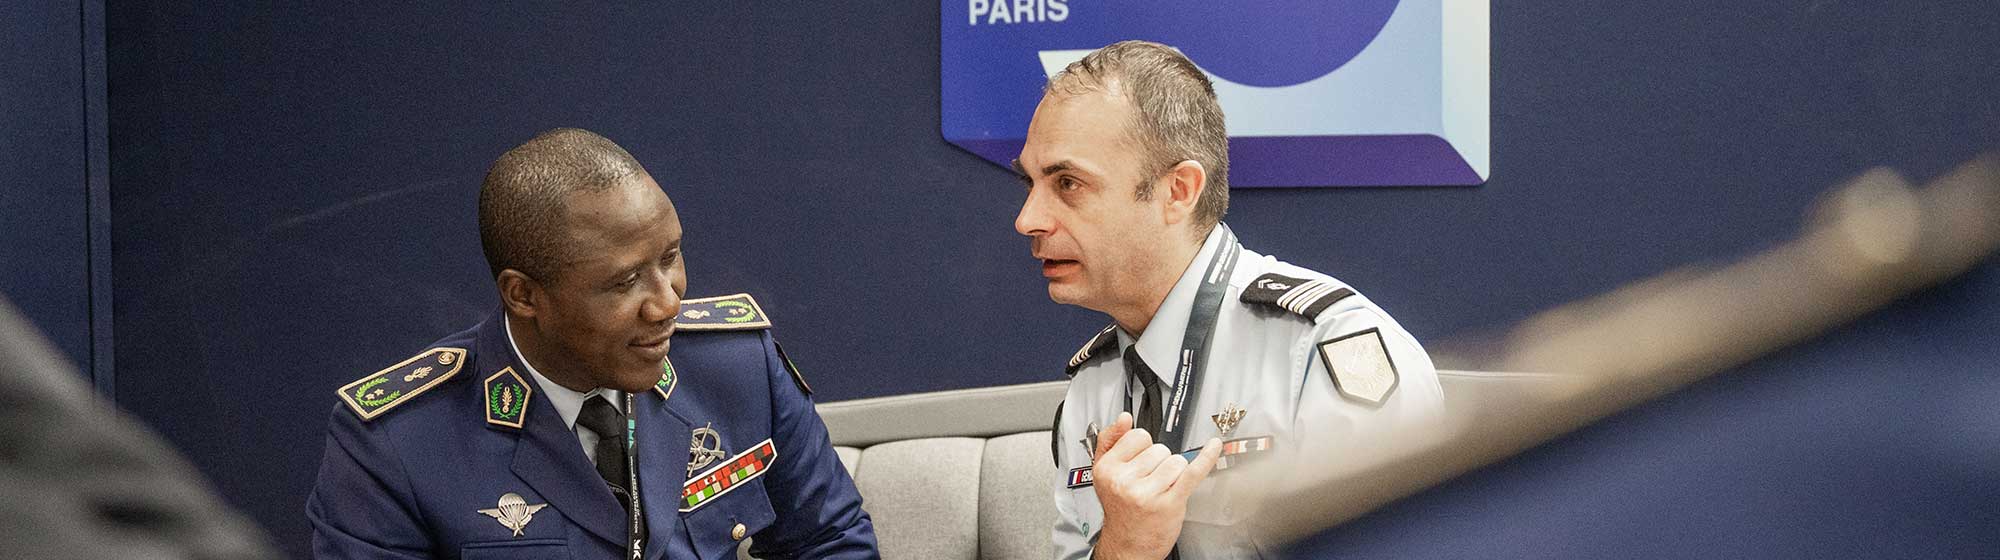 Discussion between French Gendarmerie's Officer and an Official Delegate